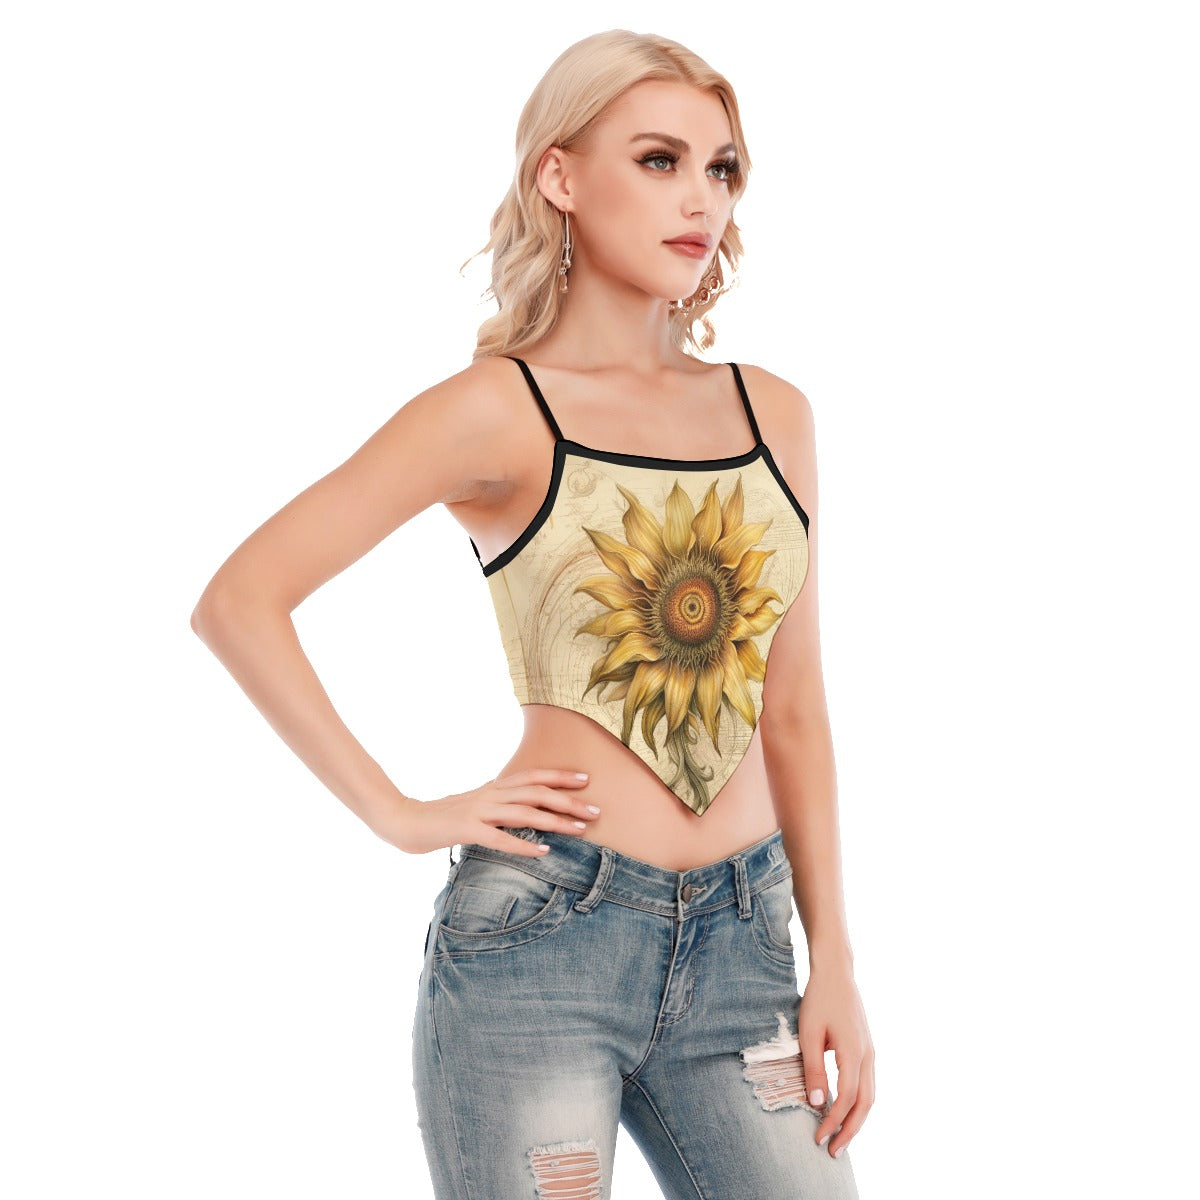 All-Over Print Women's Cami Tube Top